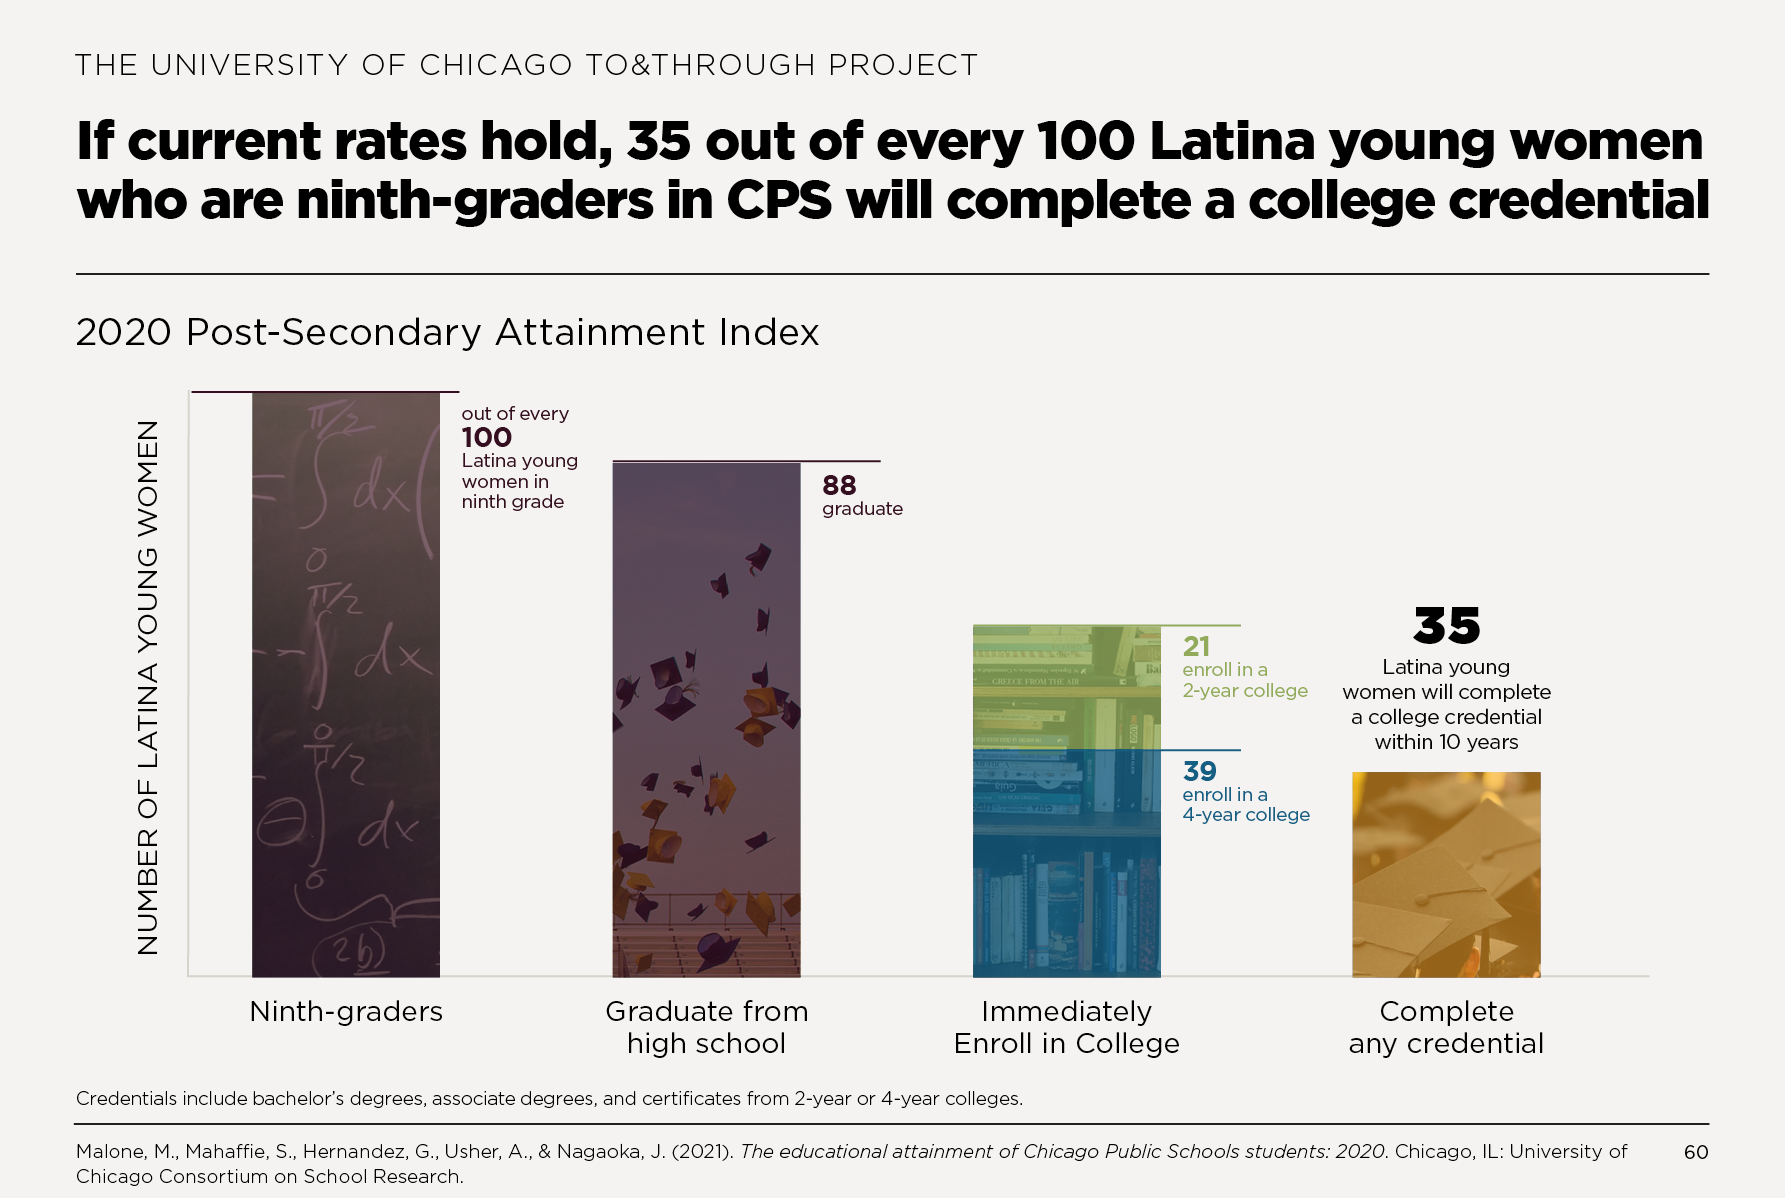 If current rates hold, 35 out of every 100 Latina young women who are ninth-graders in CPS will complete a college credential within 10 years